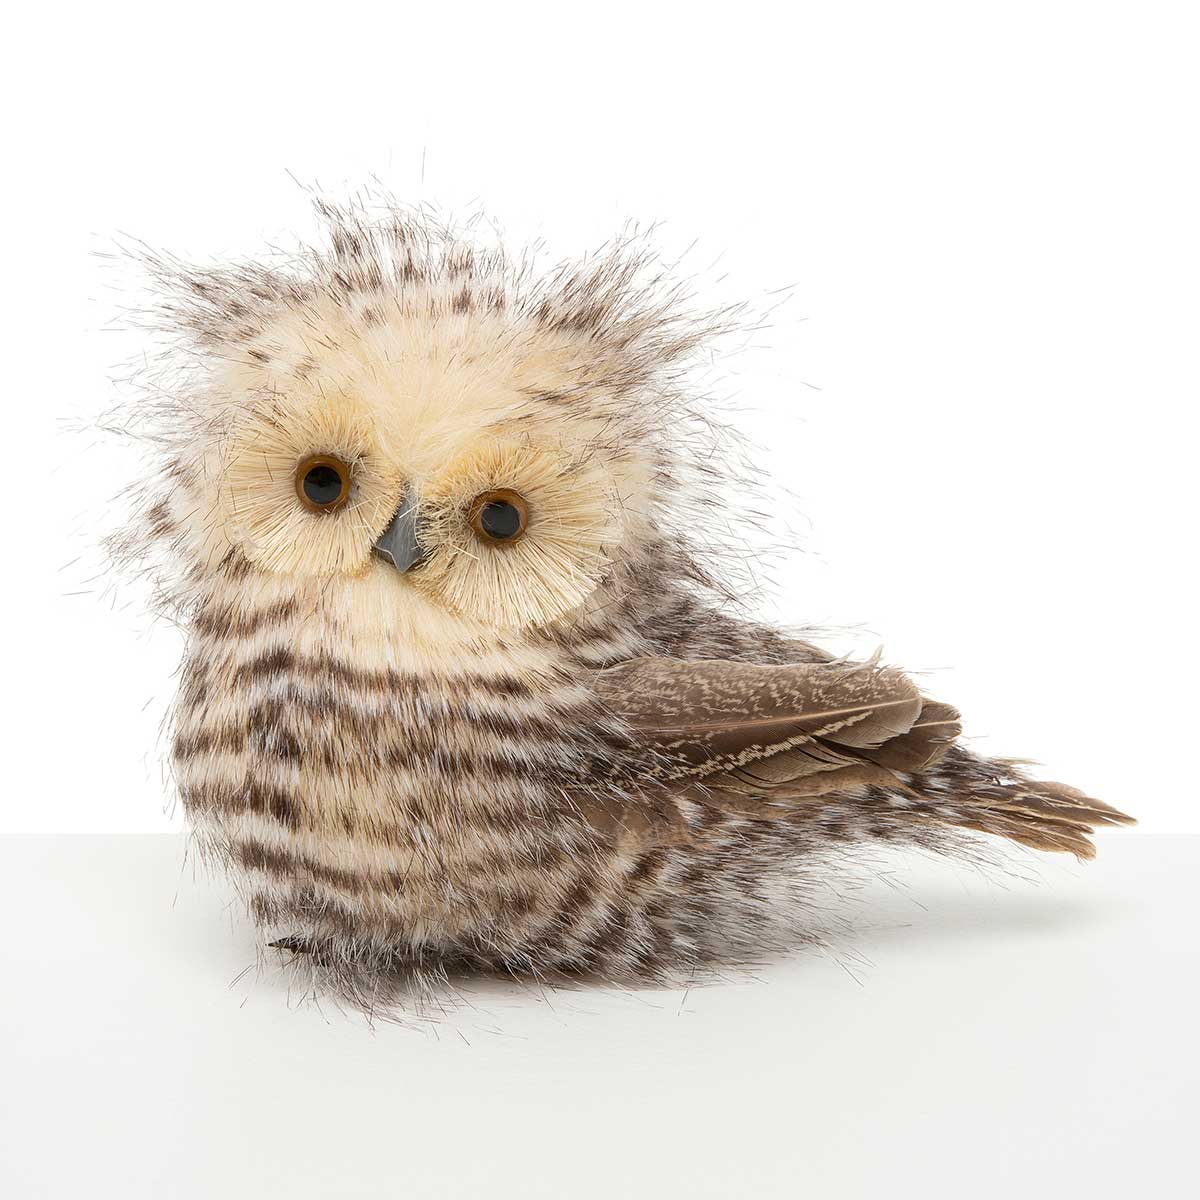 OWLET FEATHERED